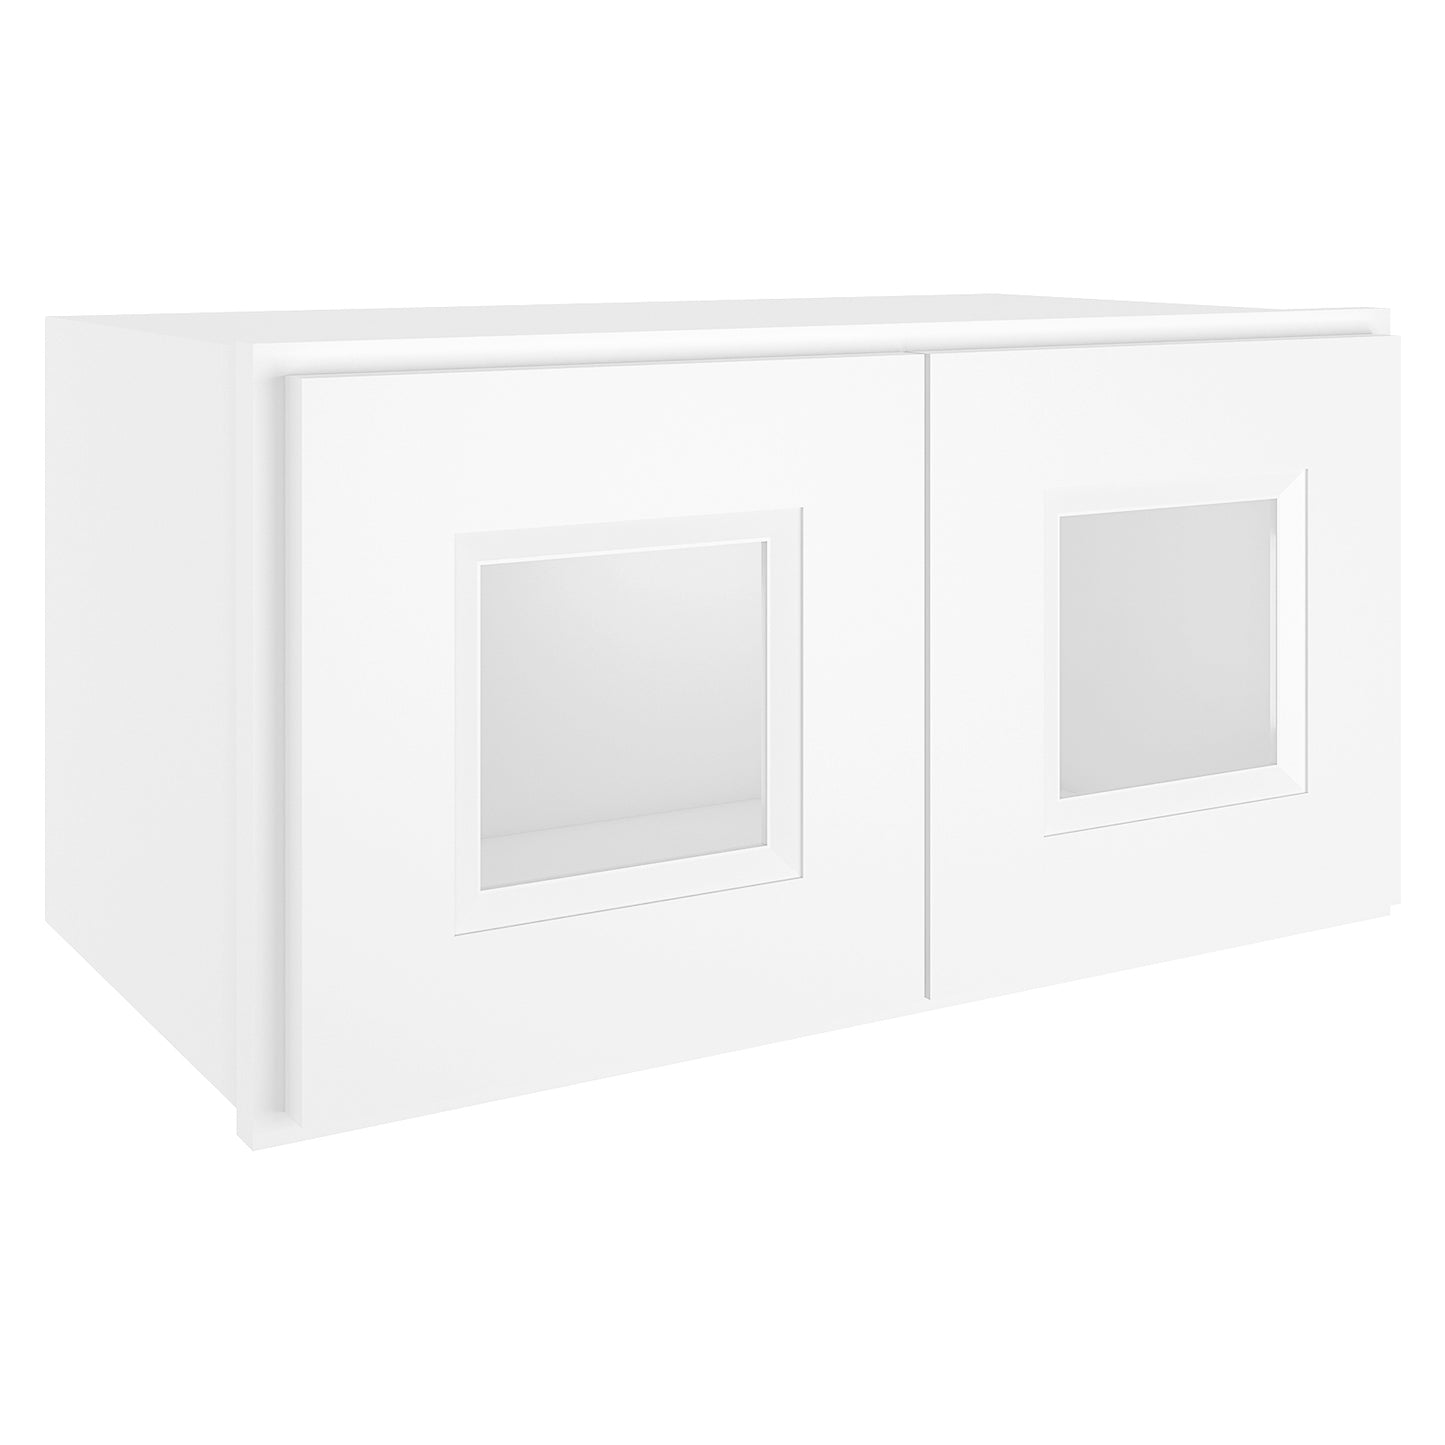 Medicine Cabinet Wall Mounted W2412GD